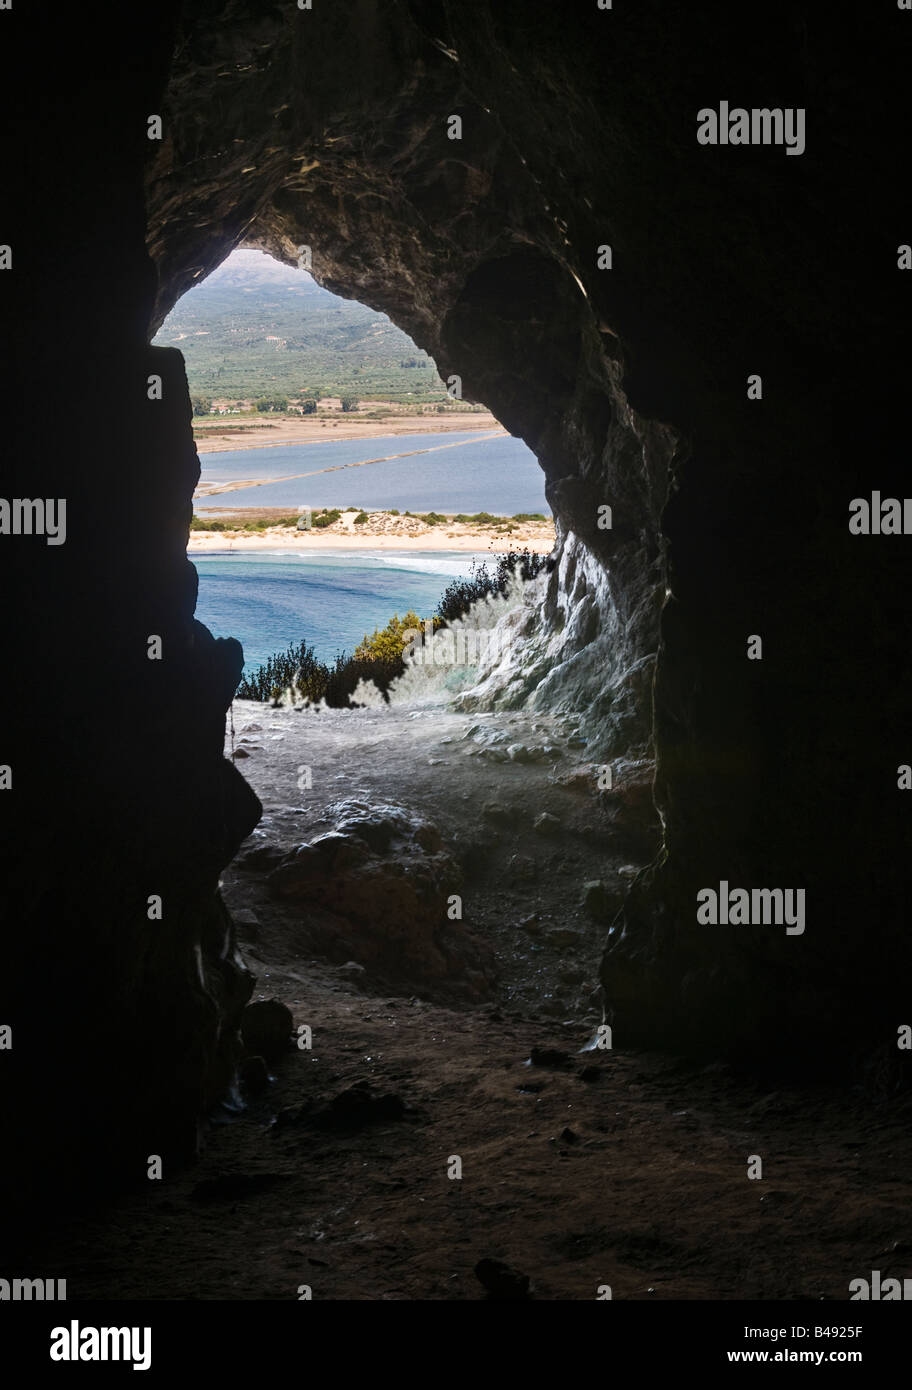 Voidokilia bay and lagoon seen from inside Nestors cave on the hill above the bay, near Pylos, Southern Peloponnese Greece Stock Photo